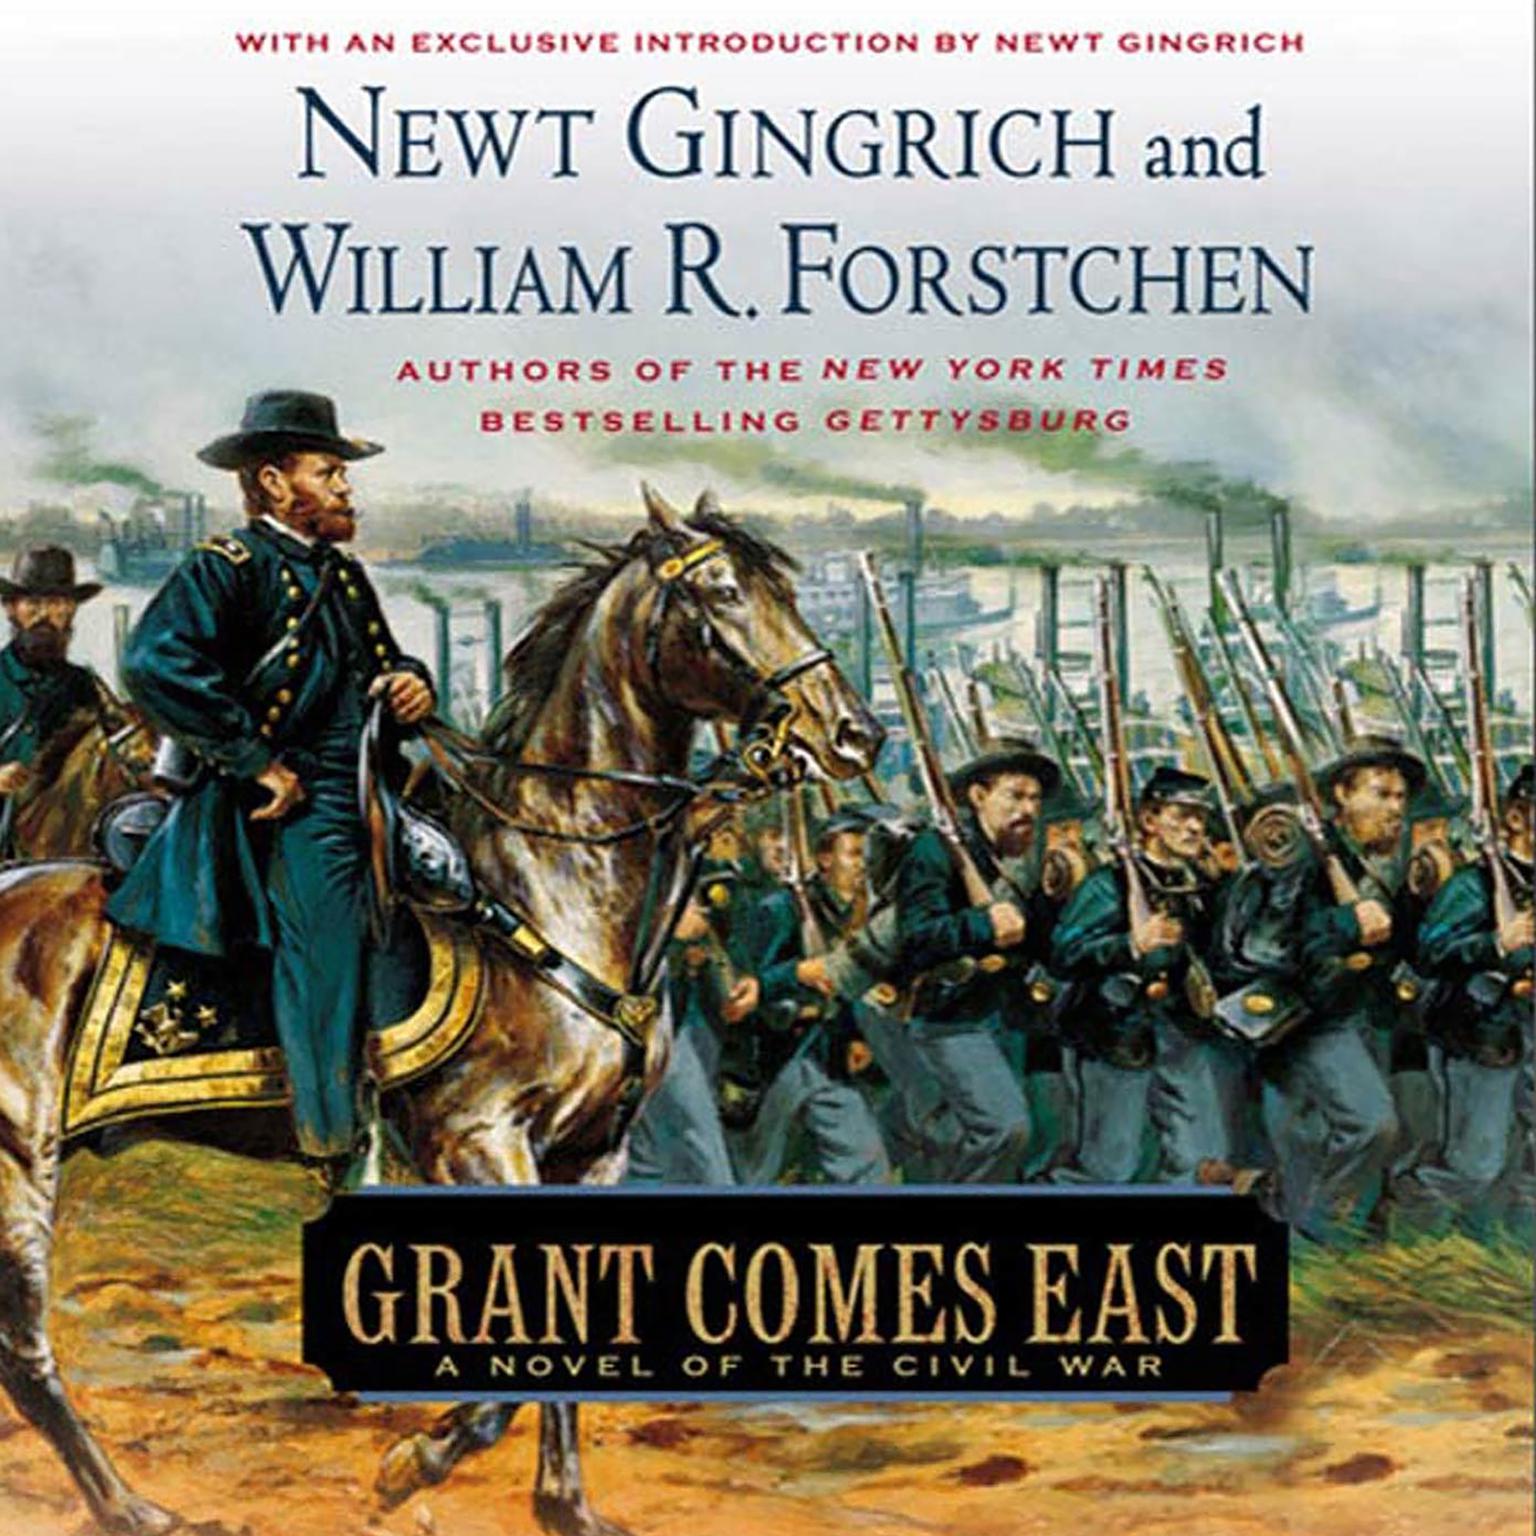 Grant Comes East (Abridged): A Novel of the Civil War Audiobook, by Newt Gingrich